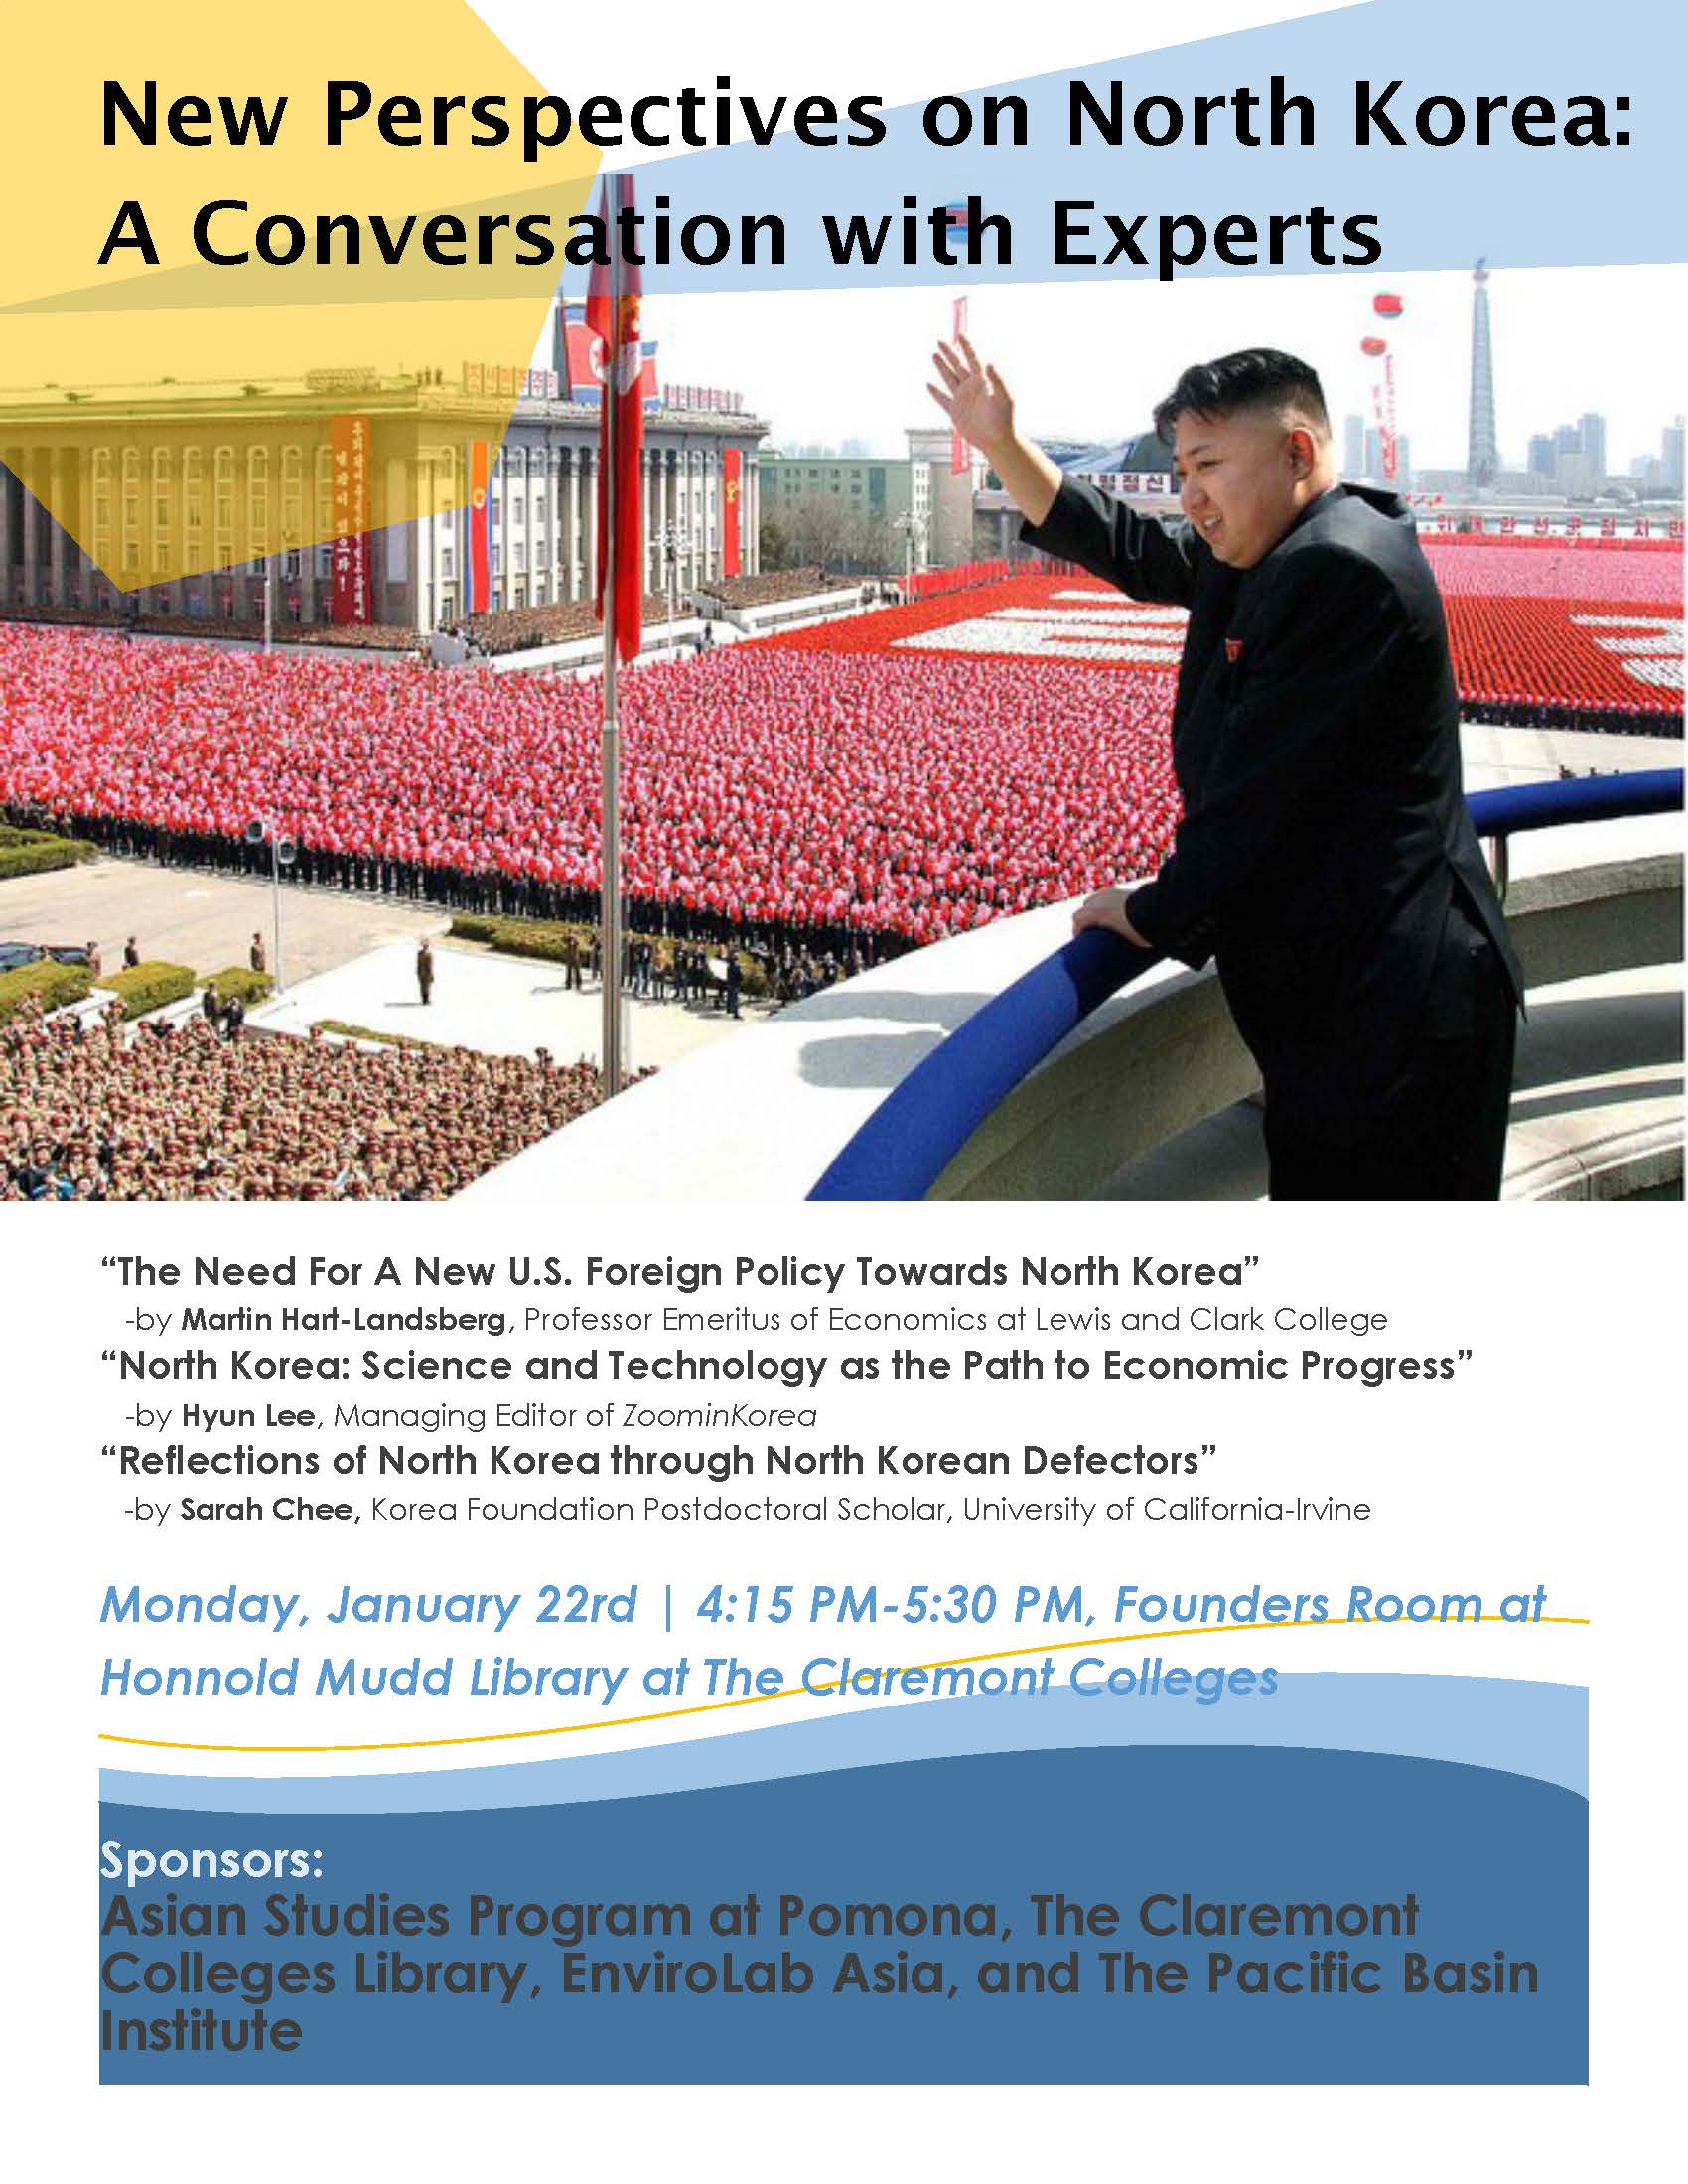 New Perspectives on North Korea: A Conversation with Experts – 1/22/18